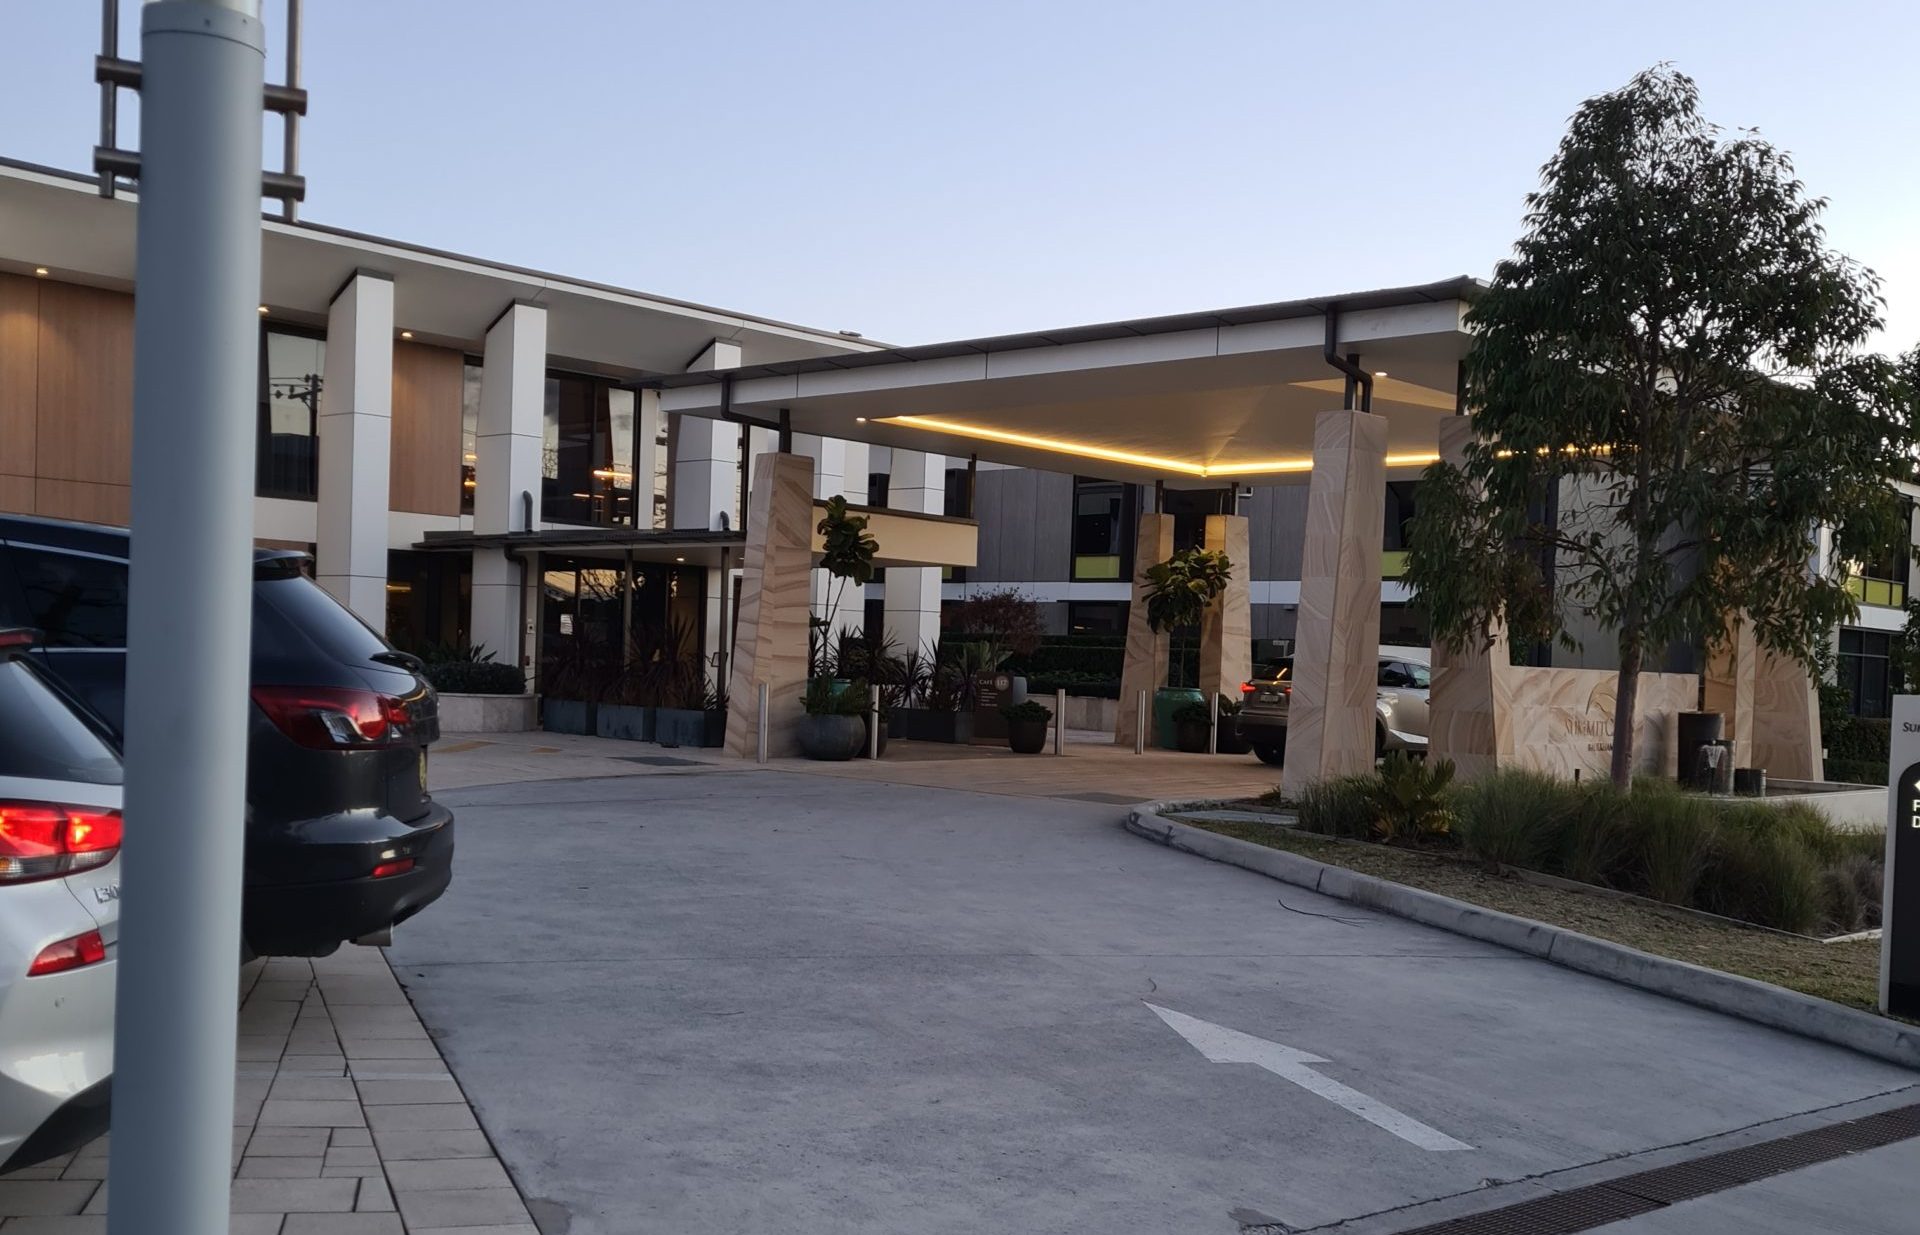 Outbreak: my experience working inside a COVID-19 positive aged care facility